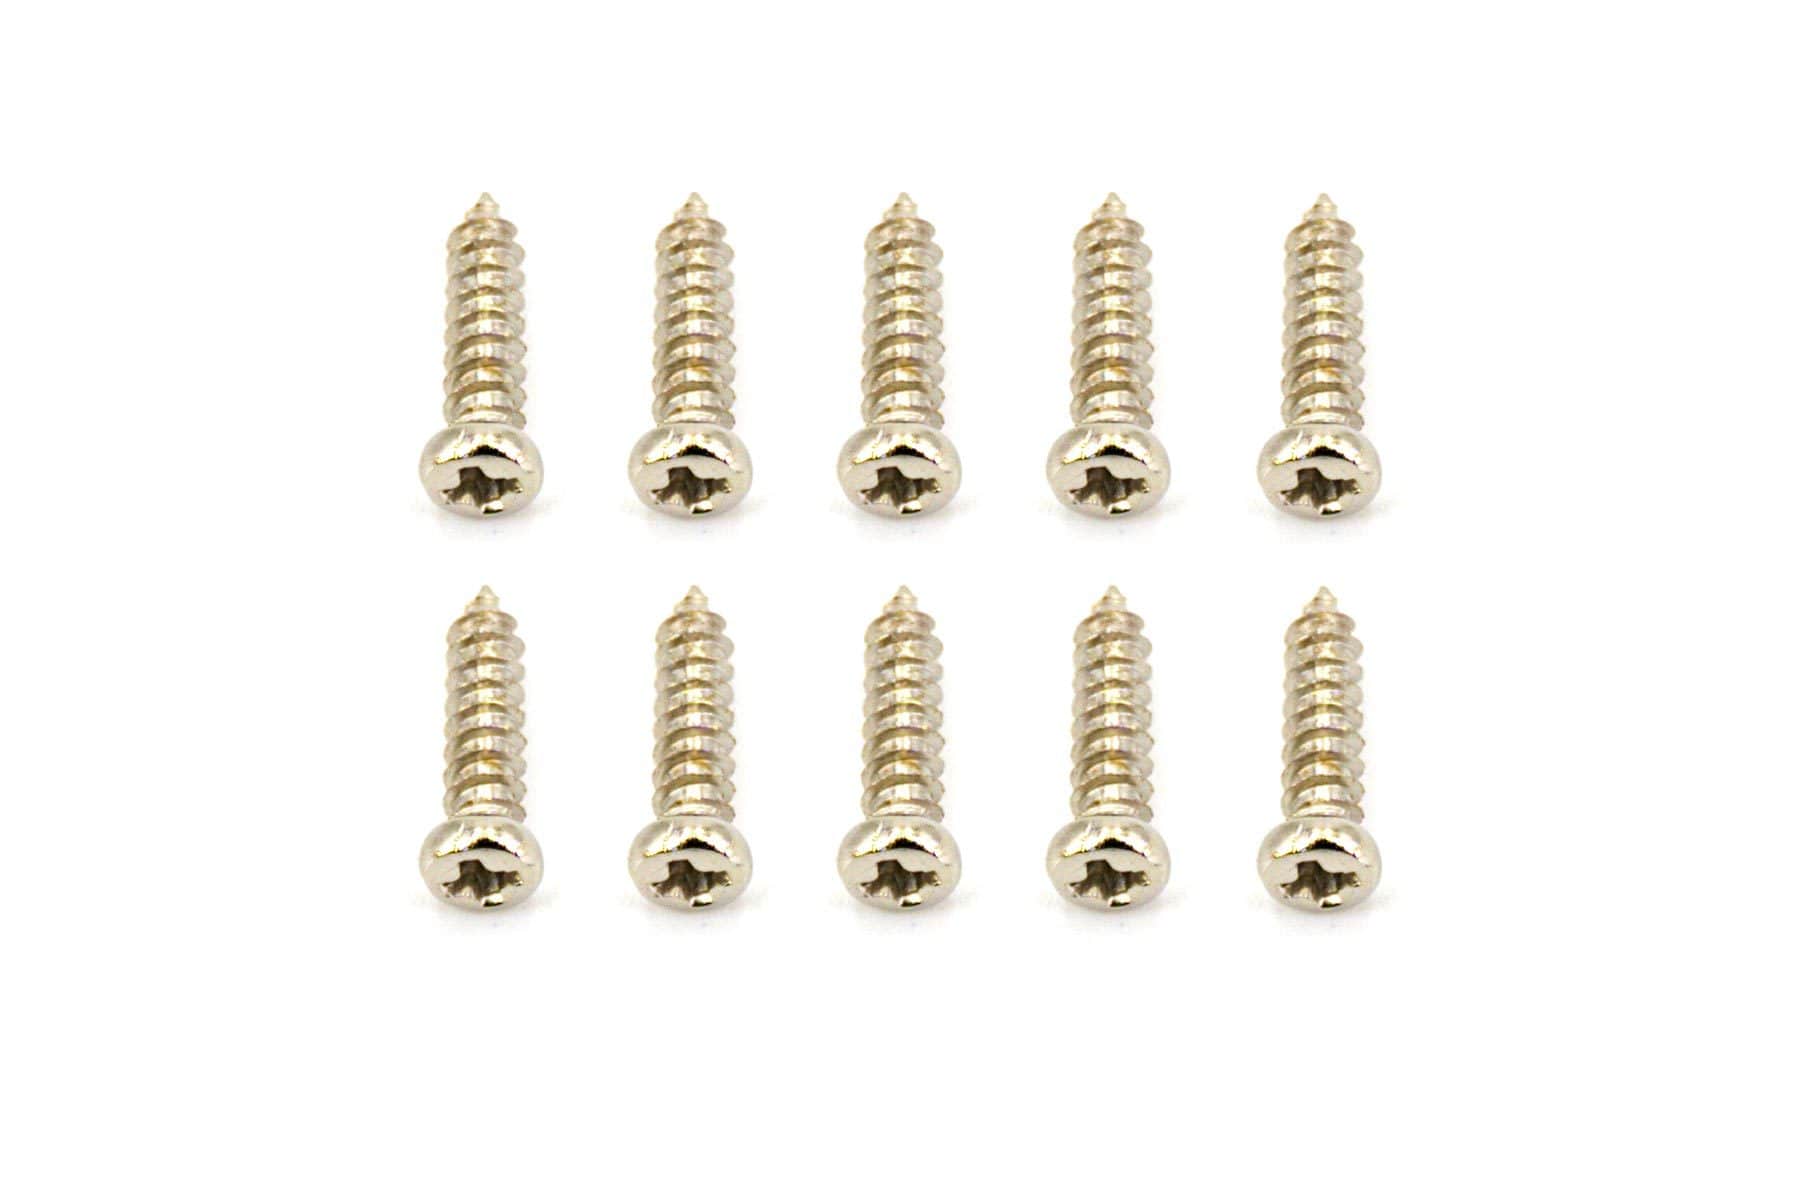 BenchCraft 2.5mm x 10mm Self-Tapping Screws (10 Pack)